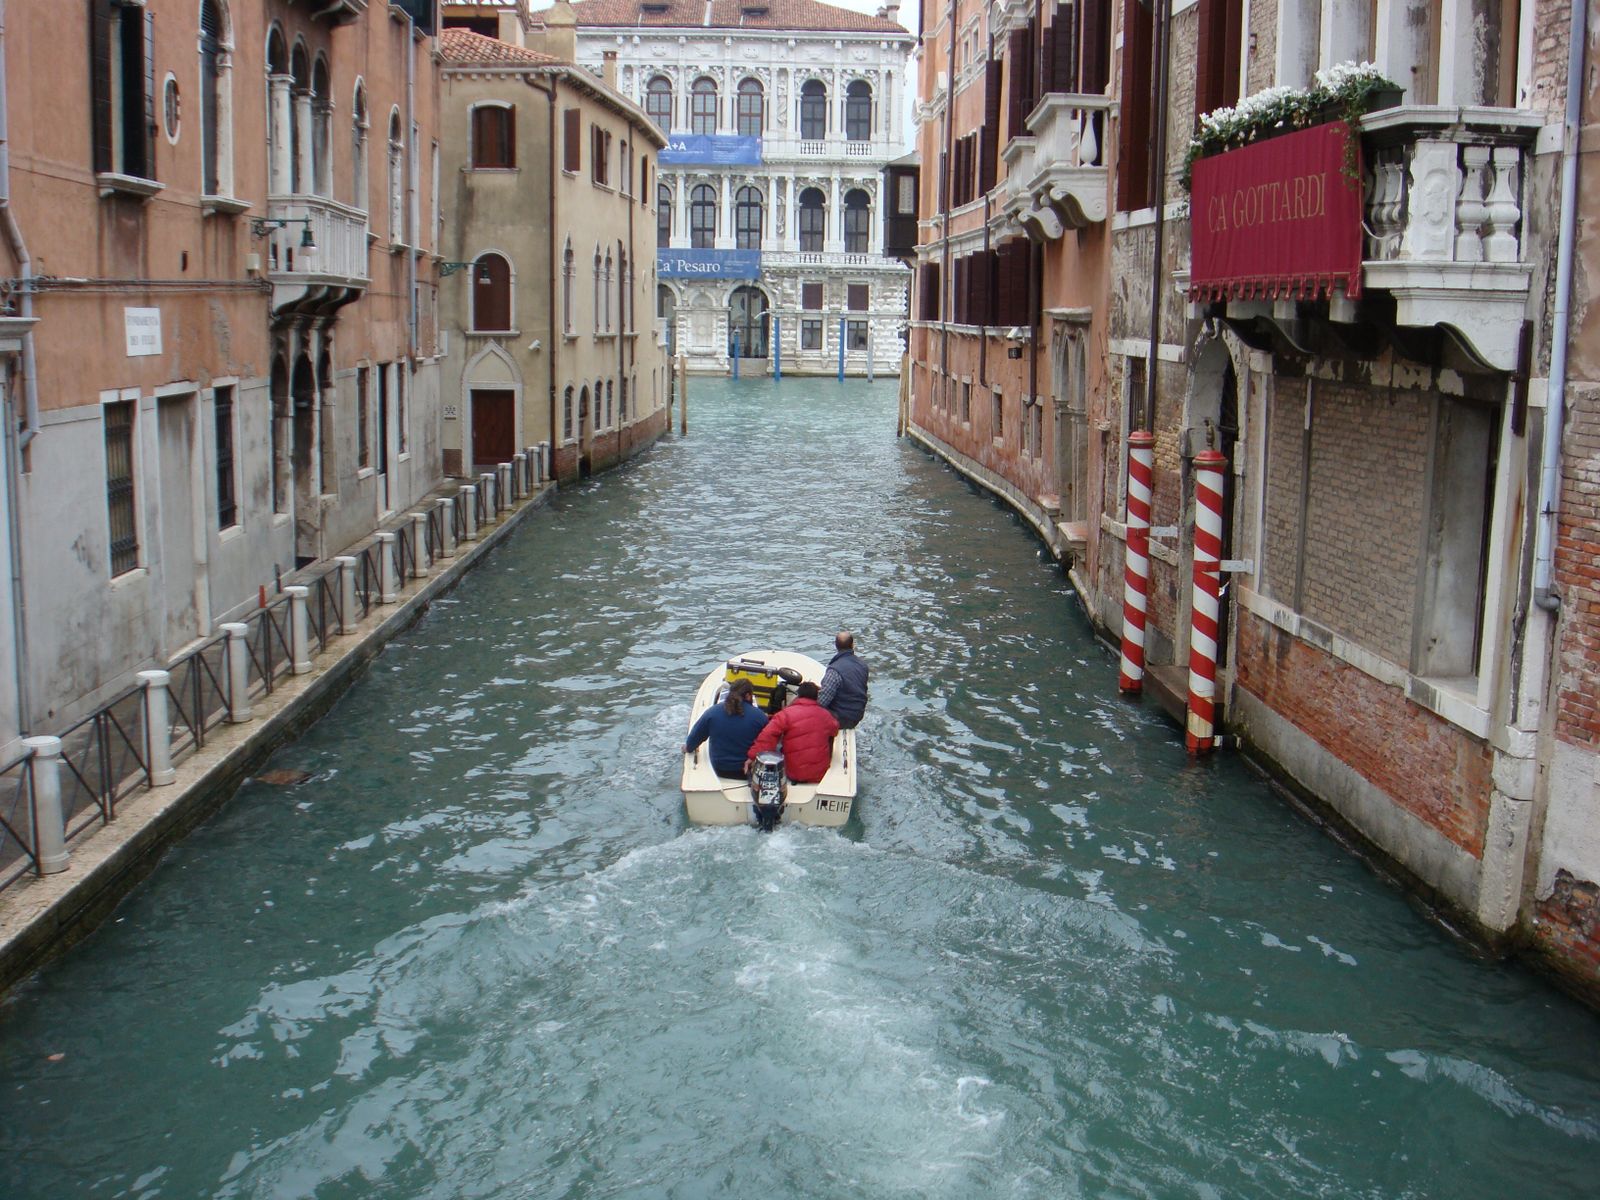 Admire the famous Venetian canals